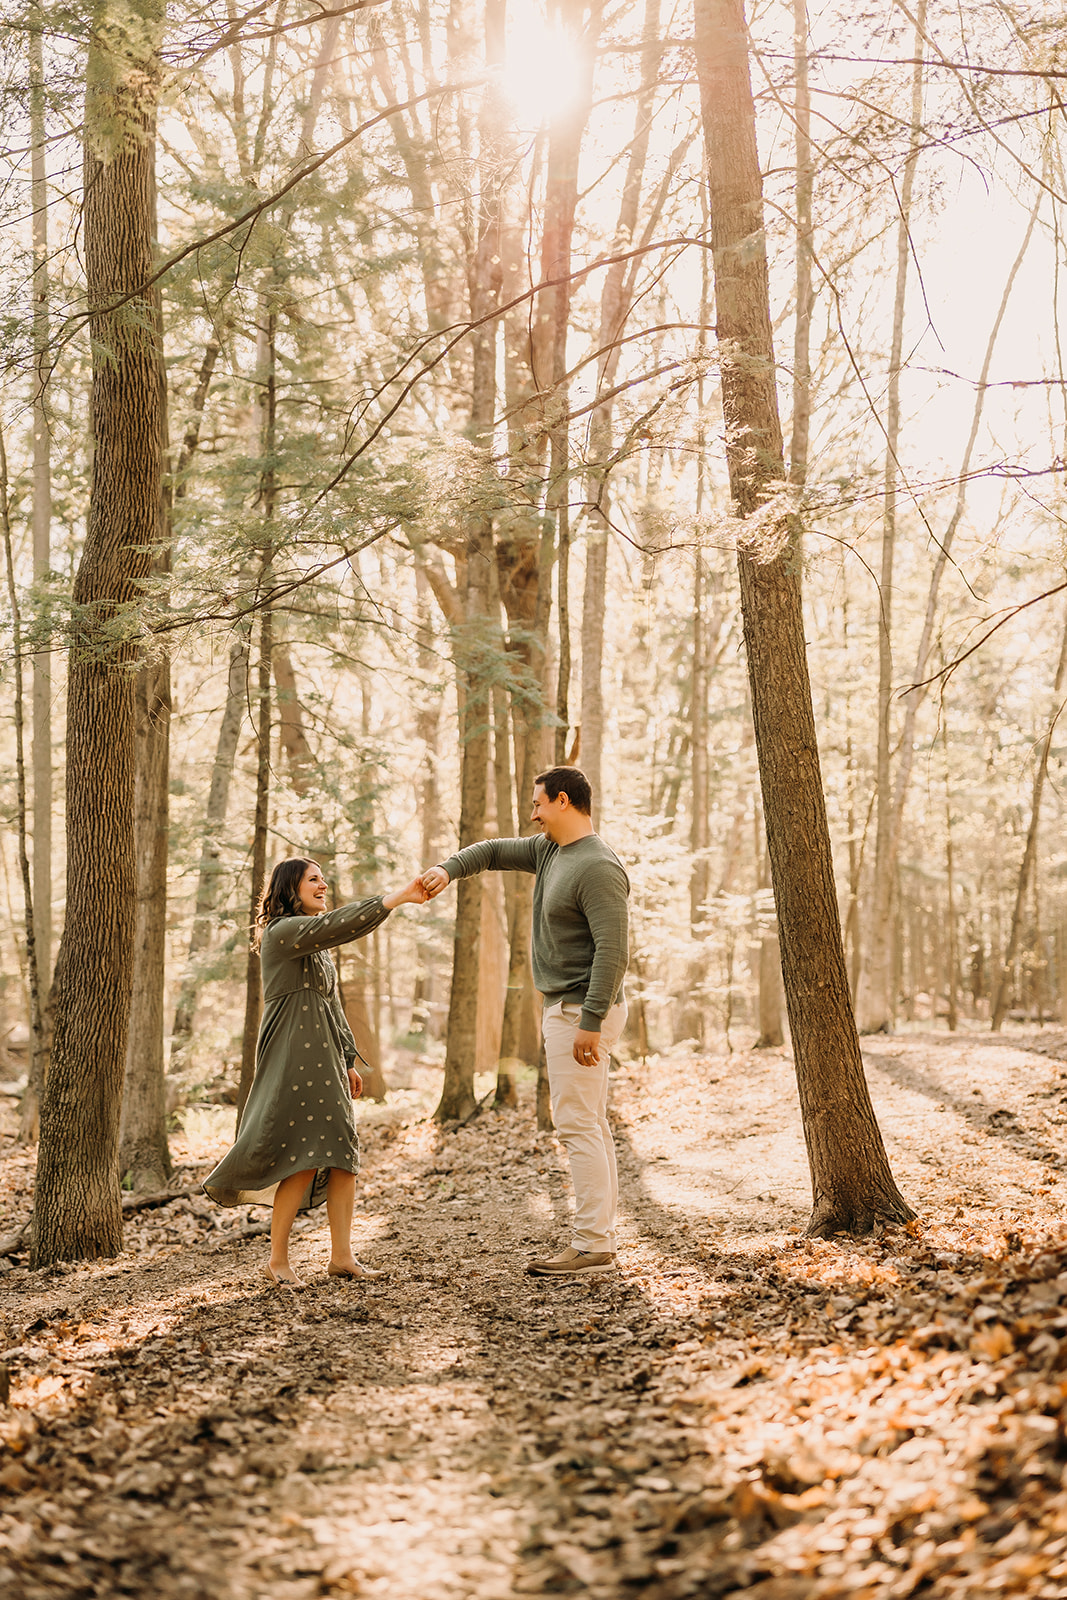 Cherished bond between husband and wife shines in an outdoor family photoshoot